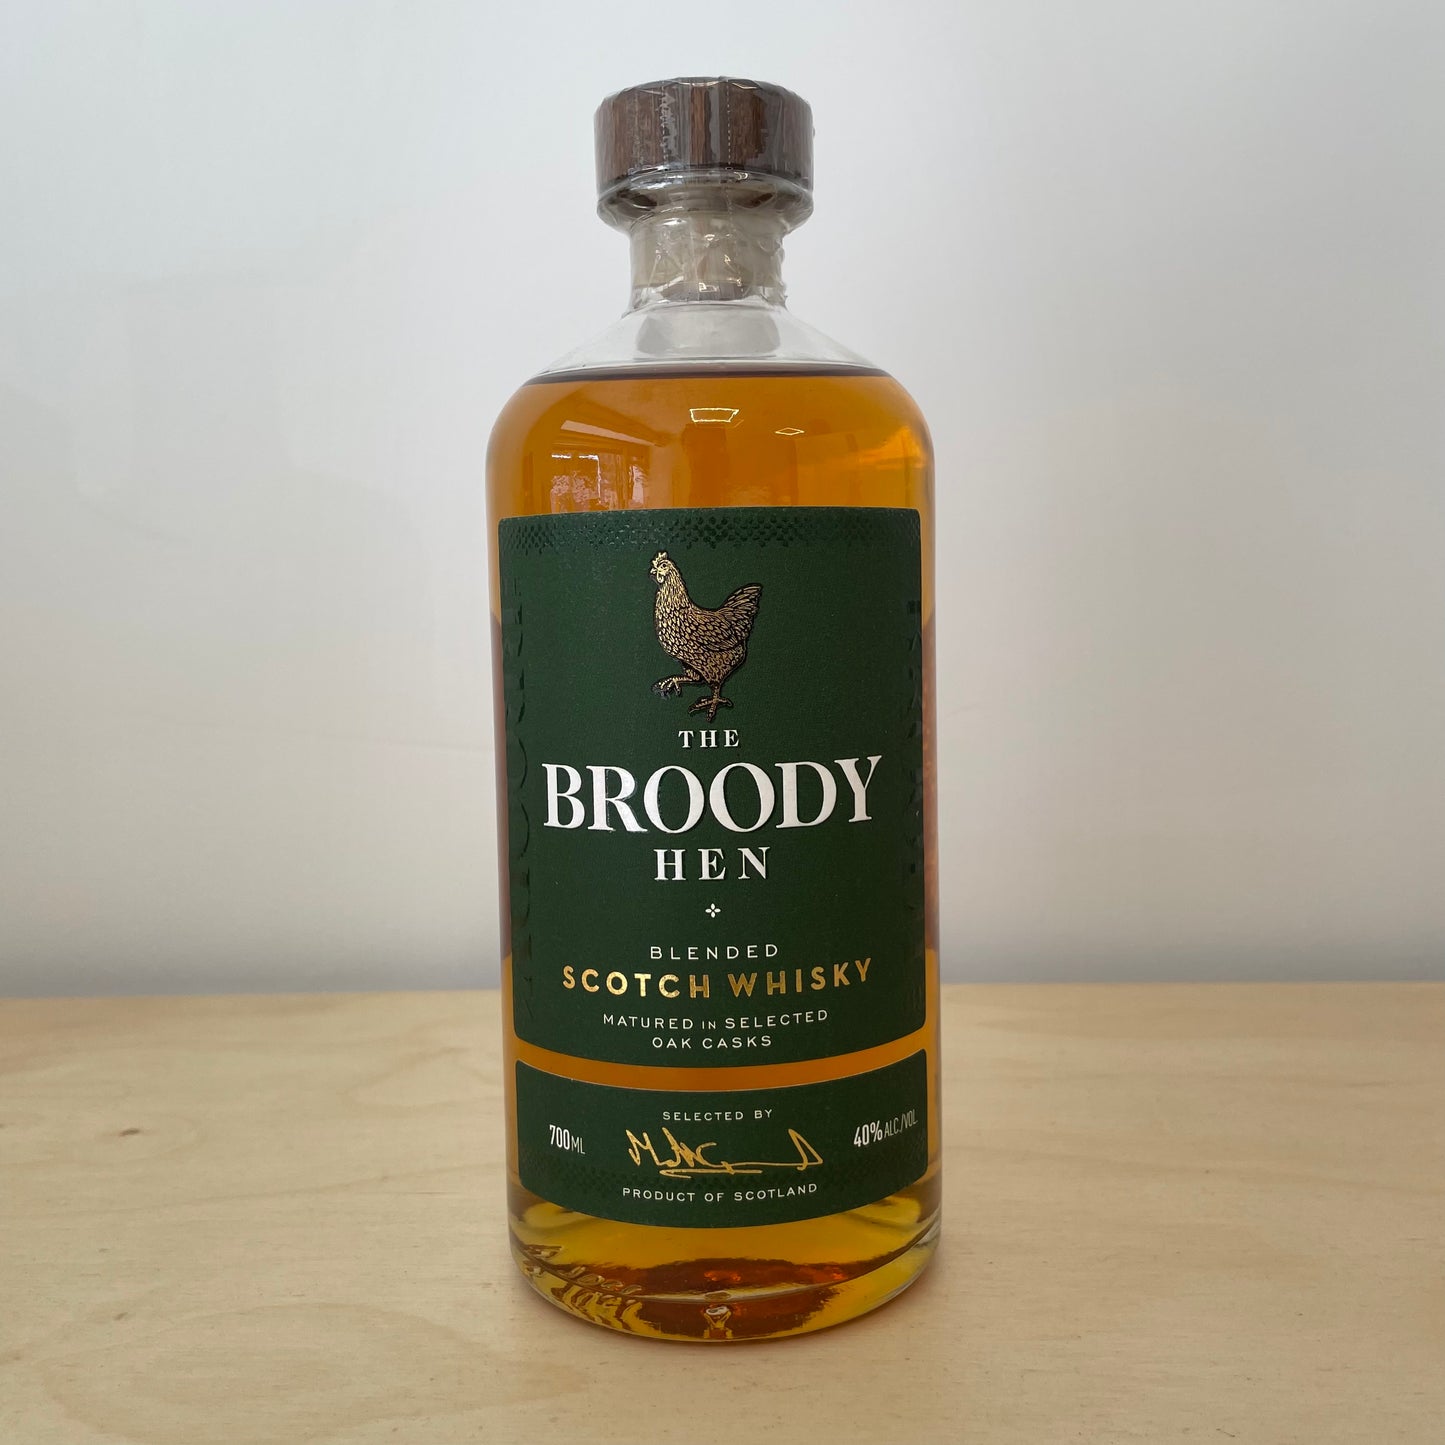 The Broody Hen Blended Scotch Whisky (70cl Bottle)